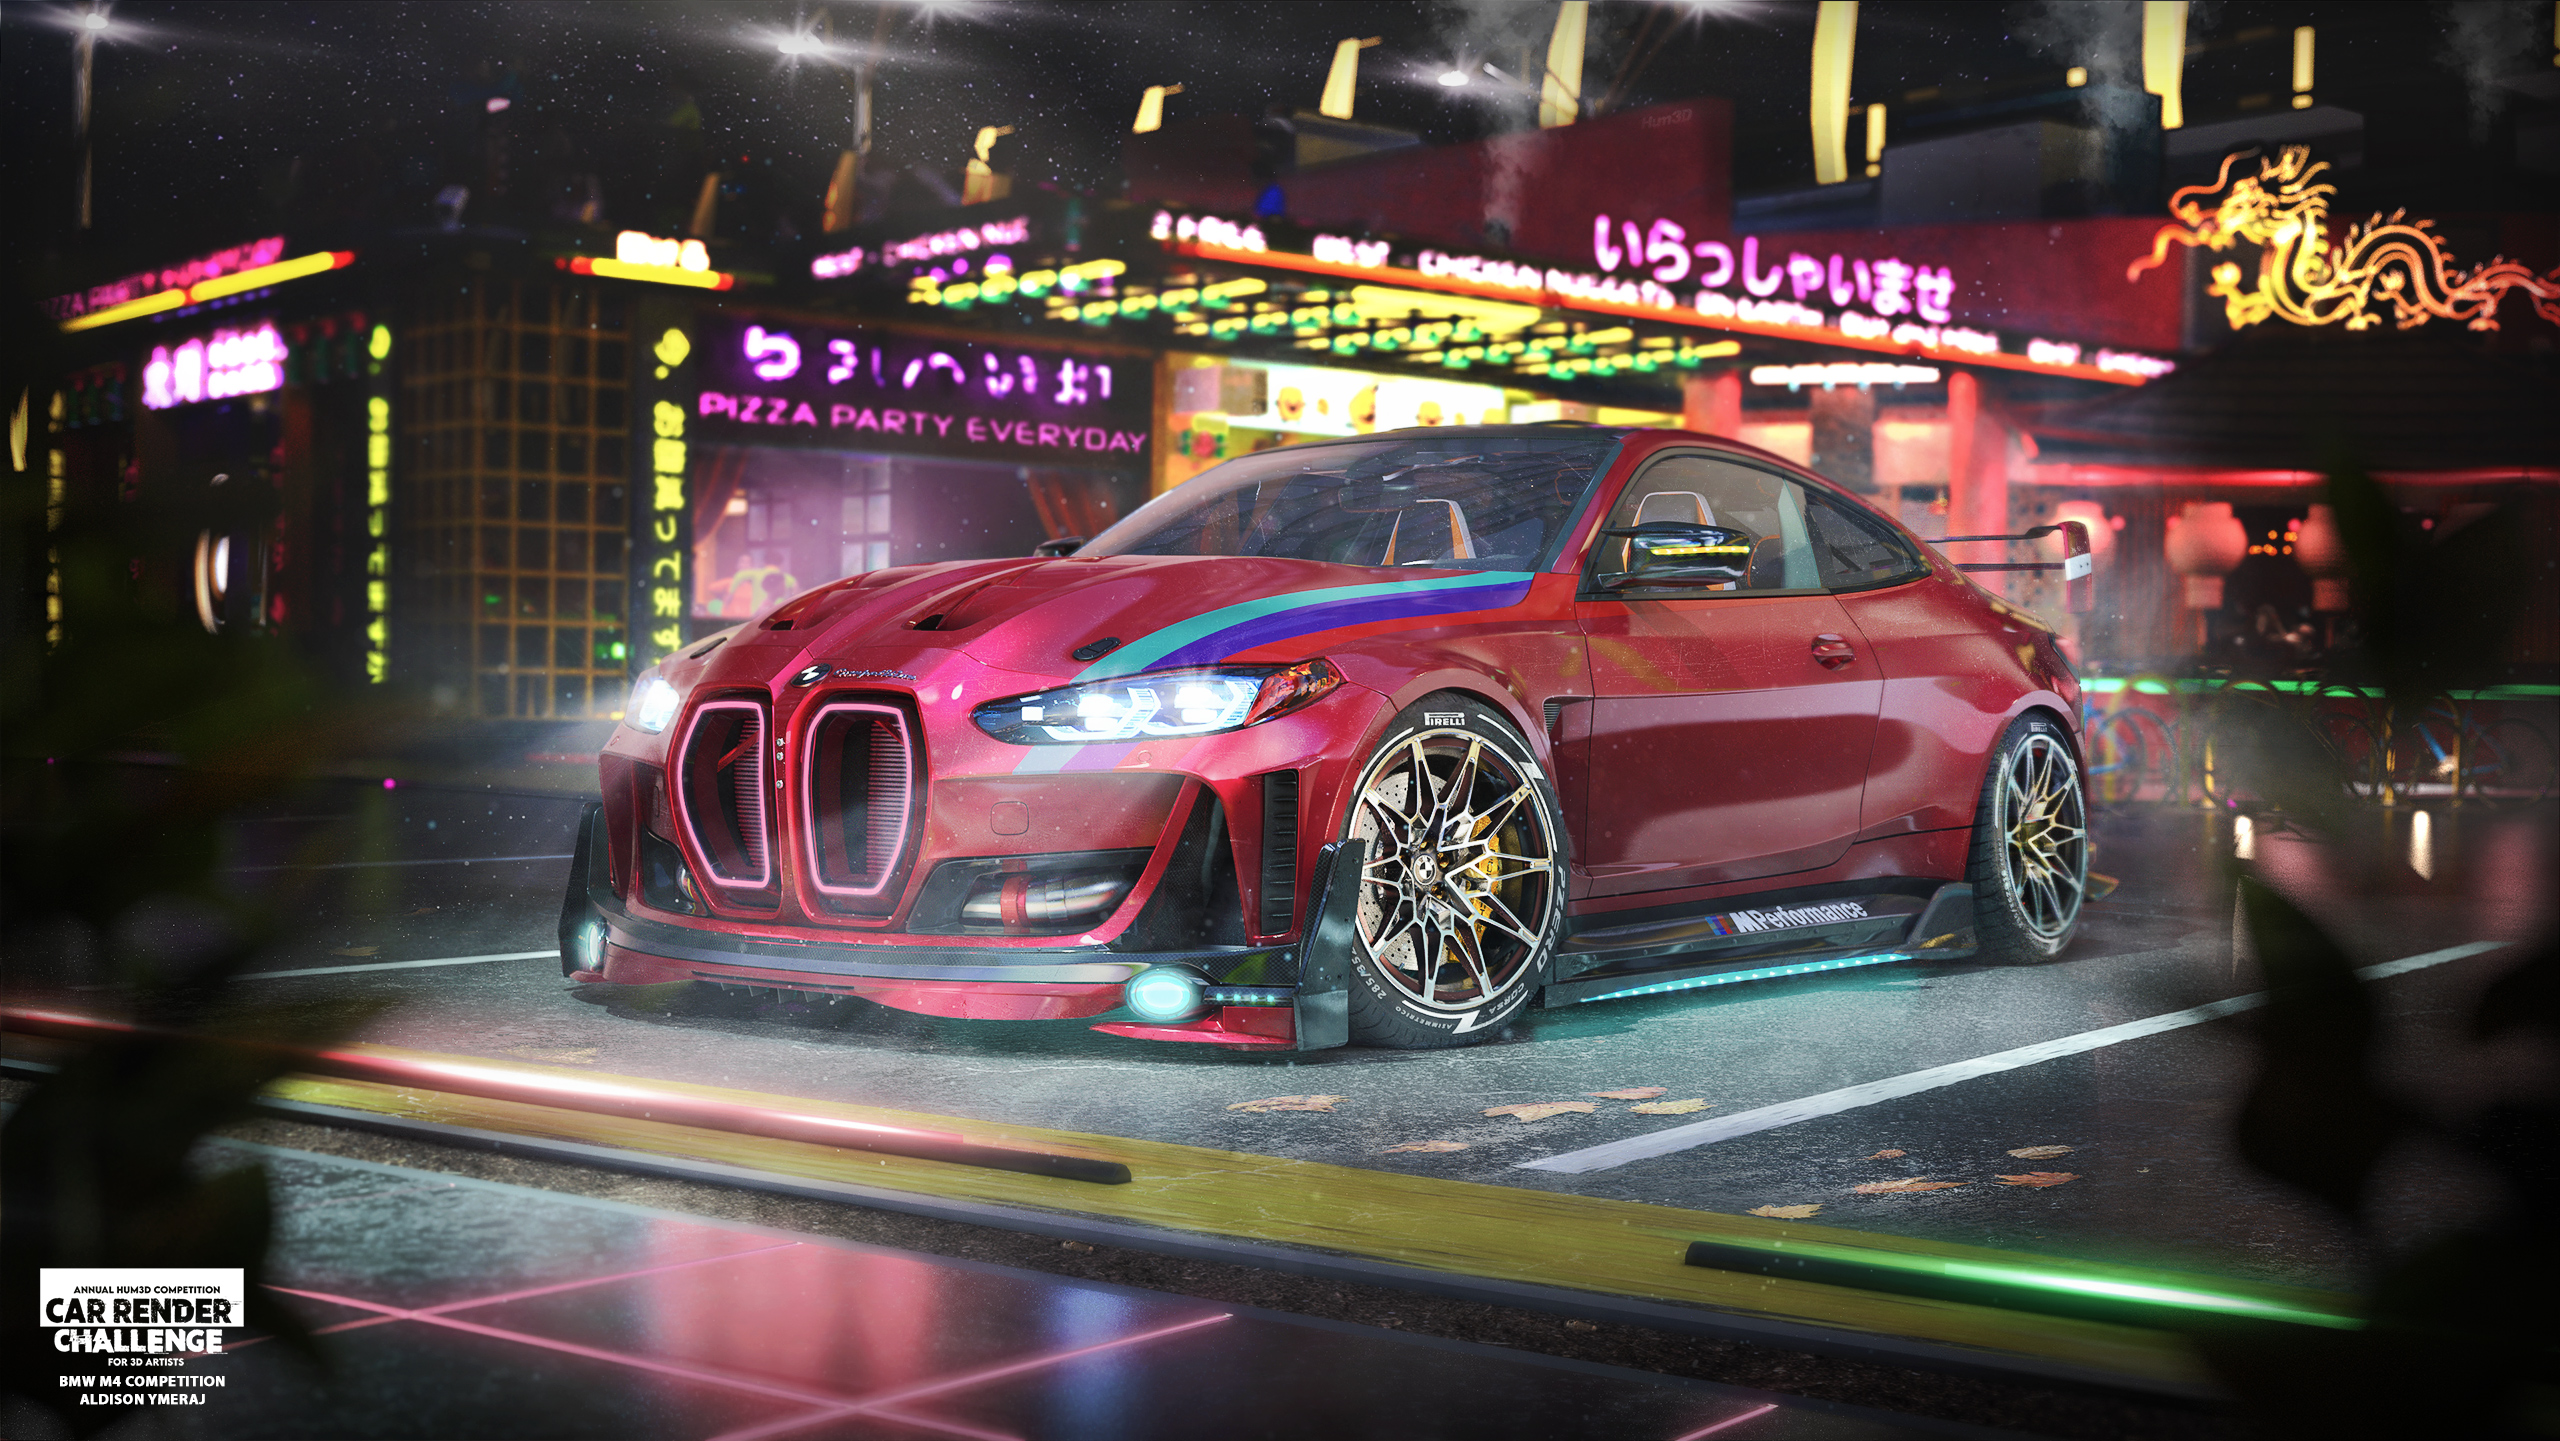 Car Render Challenge 2021 - BMW M4 Competition 2021 - Stuck in the future